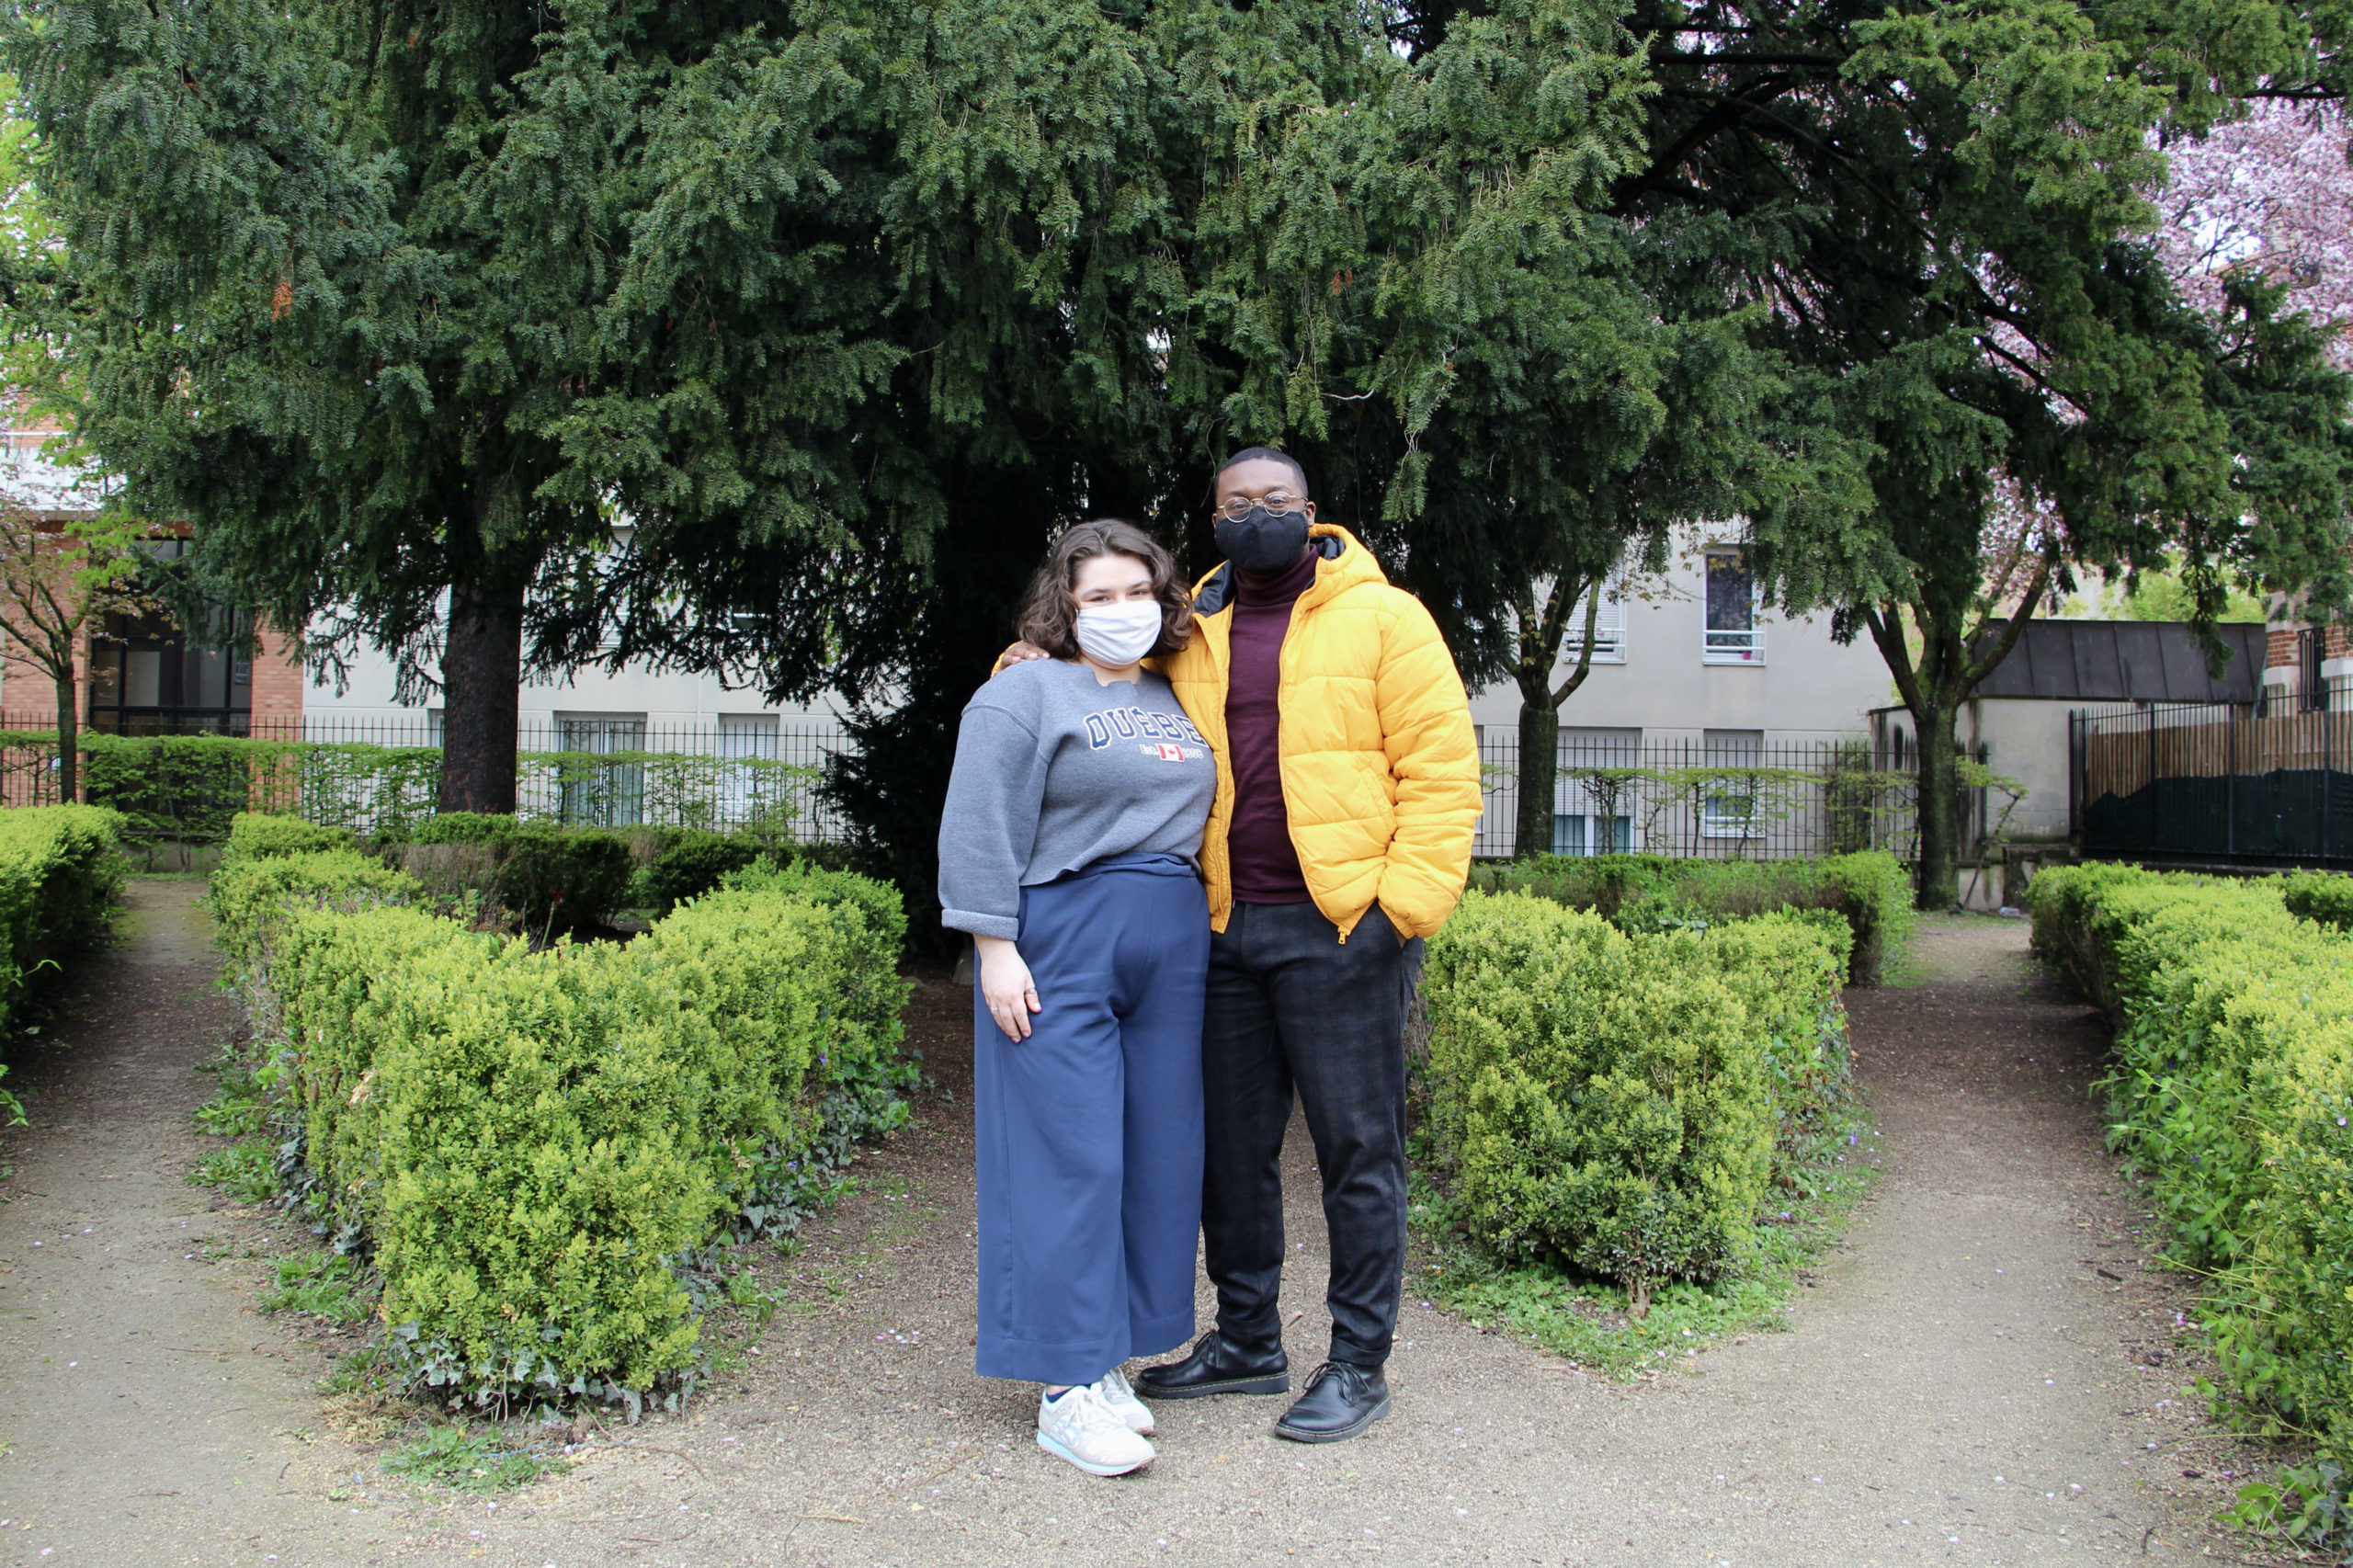 Maria and Jalen stand side by side in a park in Reims, France with green bushes and trees in the background.